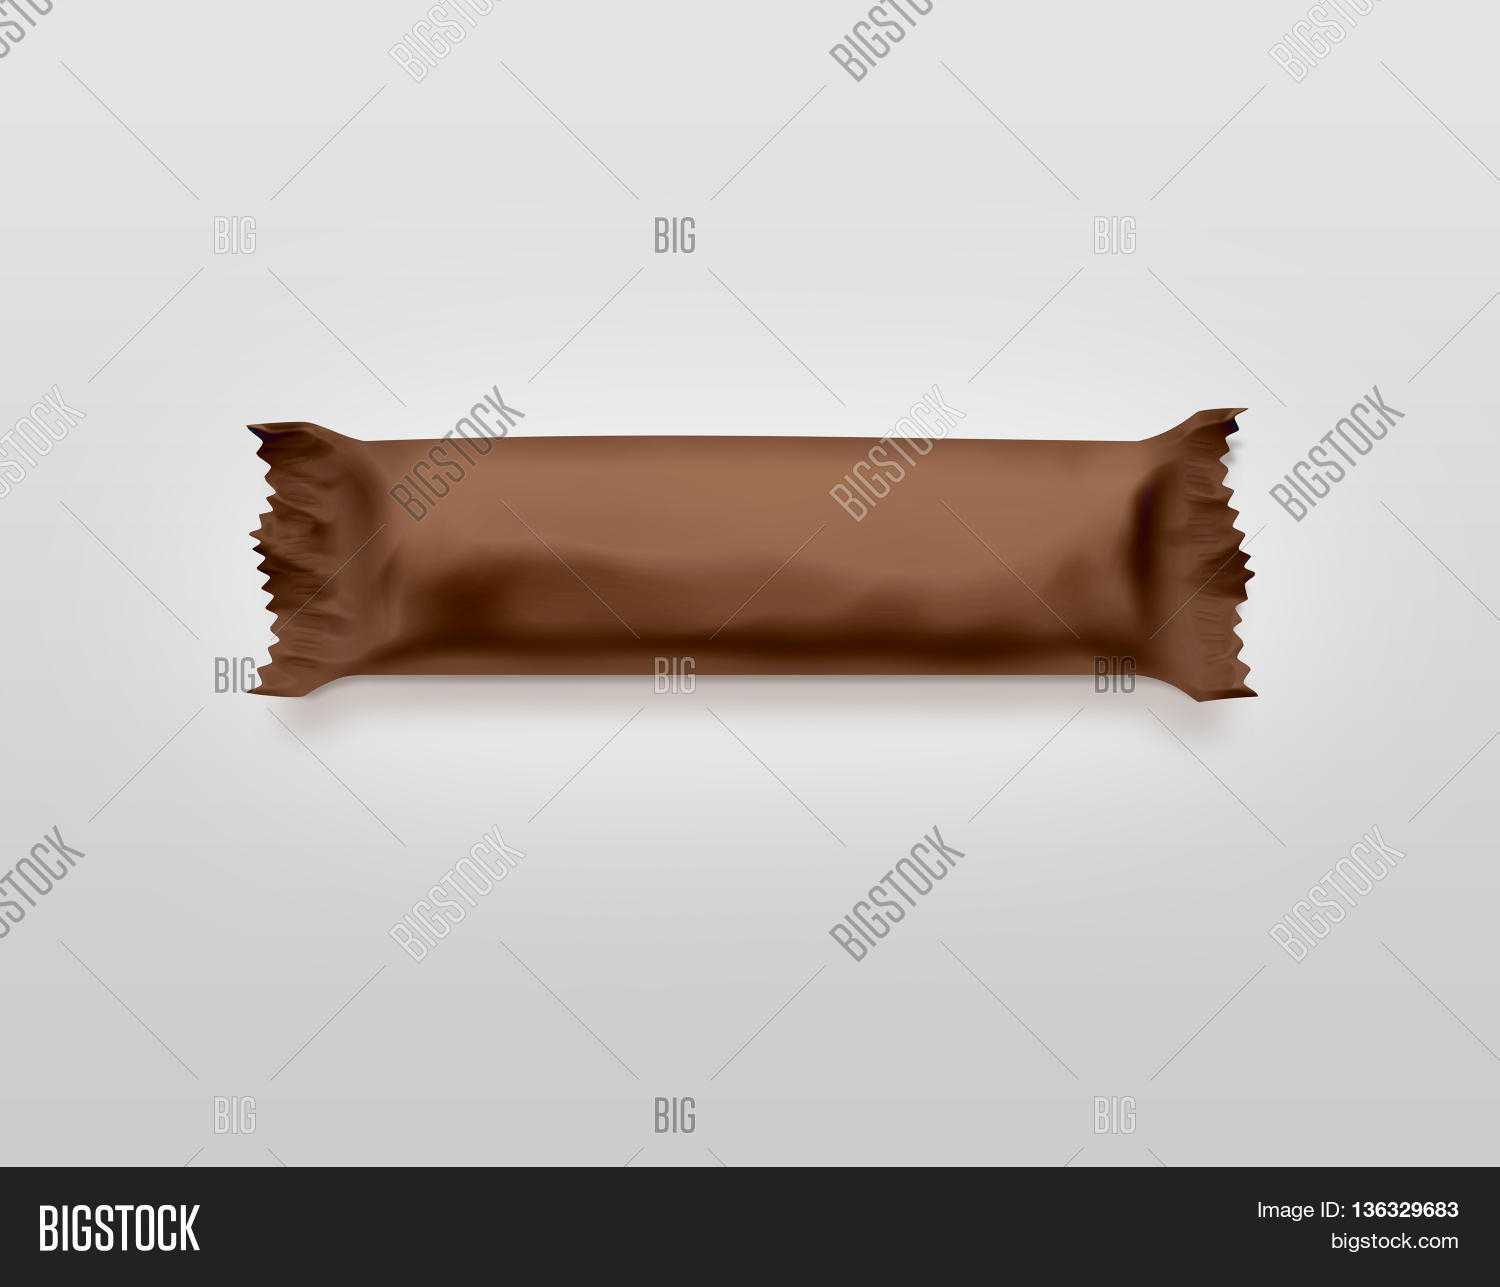 Blank Brown Candy Bar Image & Photo (Free Trial) | Bigstock With Regard To Free Blank Candy Bar Wrapper Template